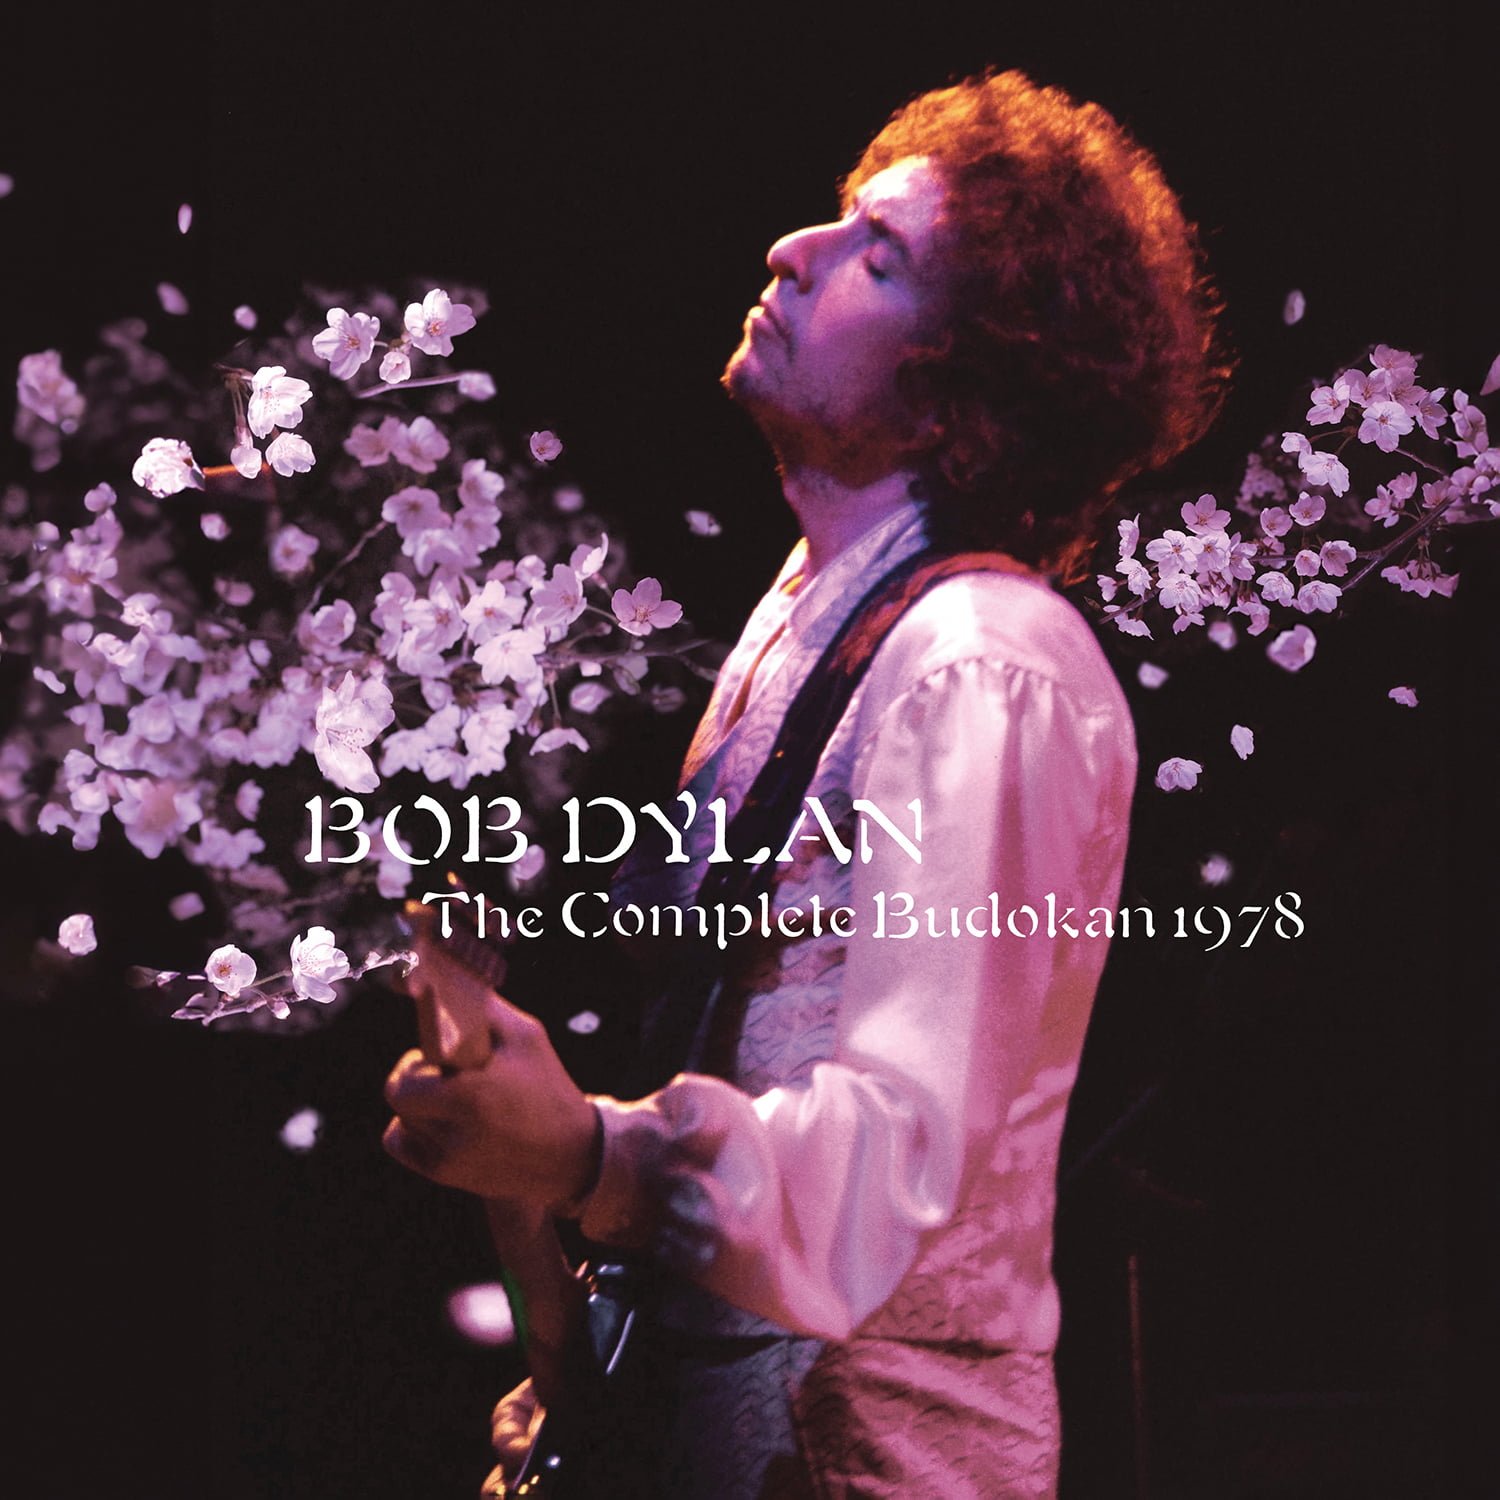 Bob Dylan &#8216;The Complete Budokan 1978&#8217; Available Now